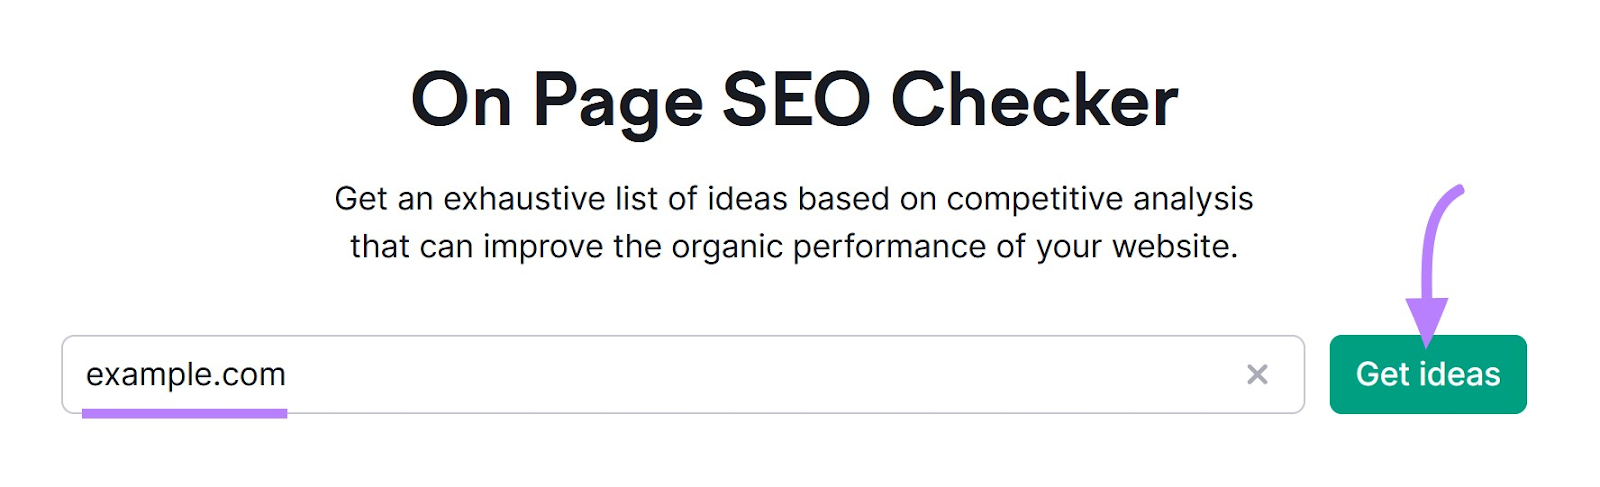 Semrush's On Page SEO Checker tool interface with a filled domain input and a green "Get ideas" button.